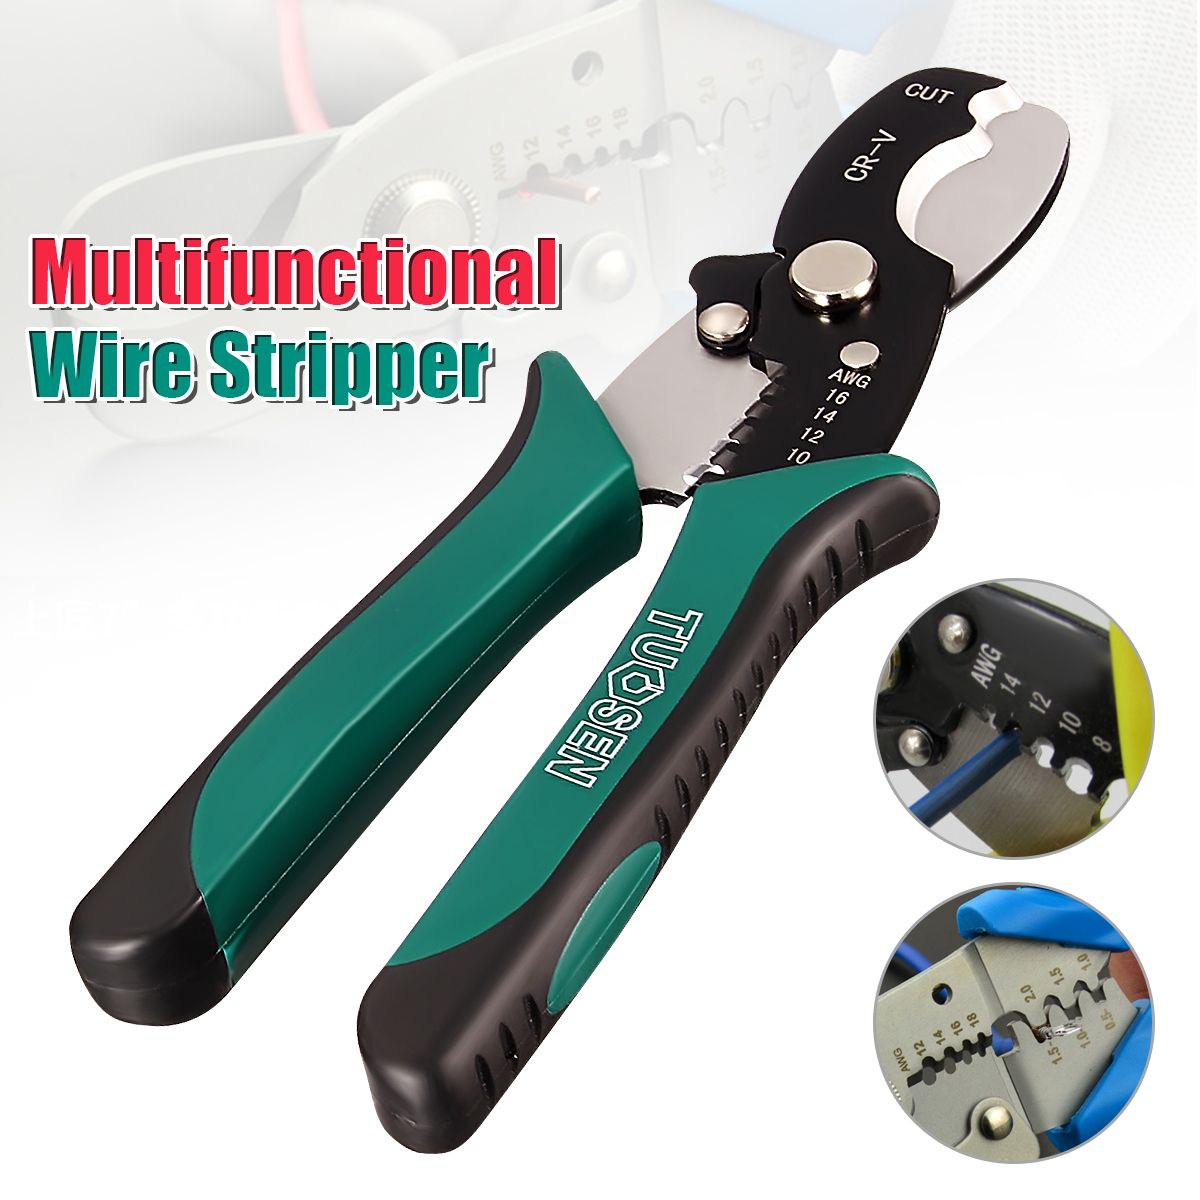 Multifunctional-Wire-Stripper-Cable-Cutting-Scissor-Stripping-Pliers-Cutter-16-40mm-Hand-Tools-1258704